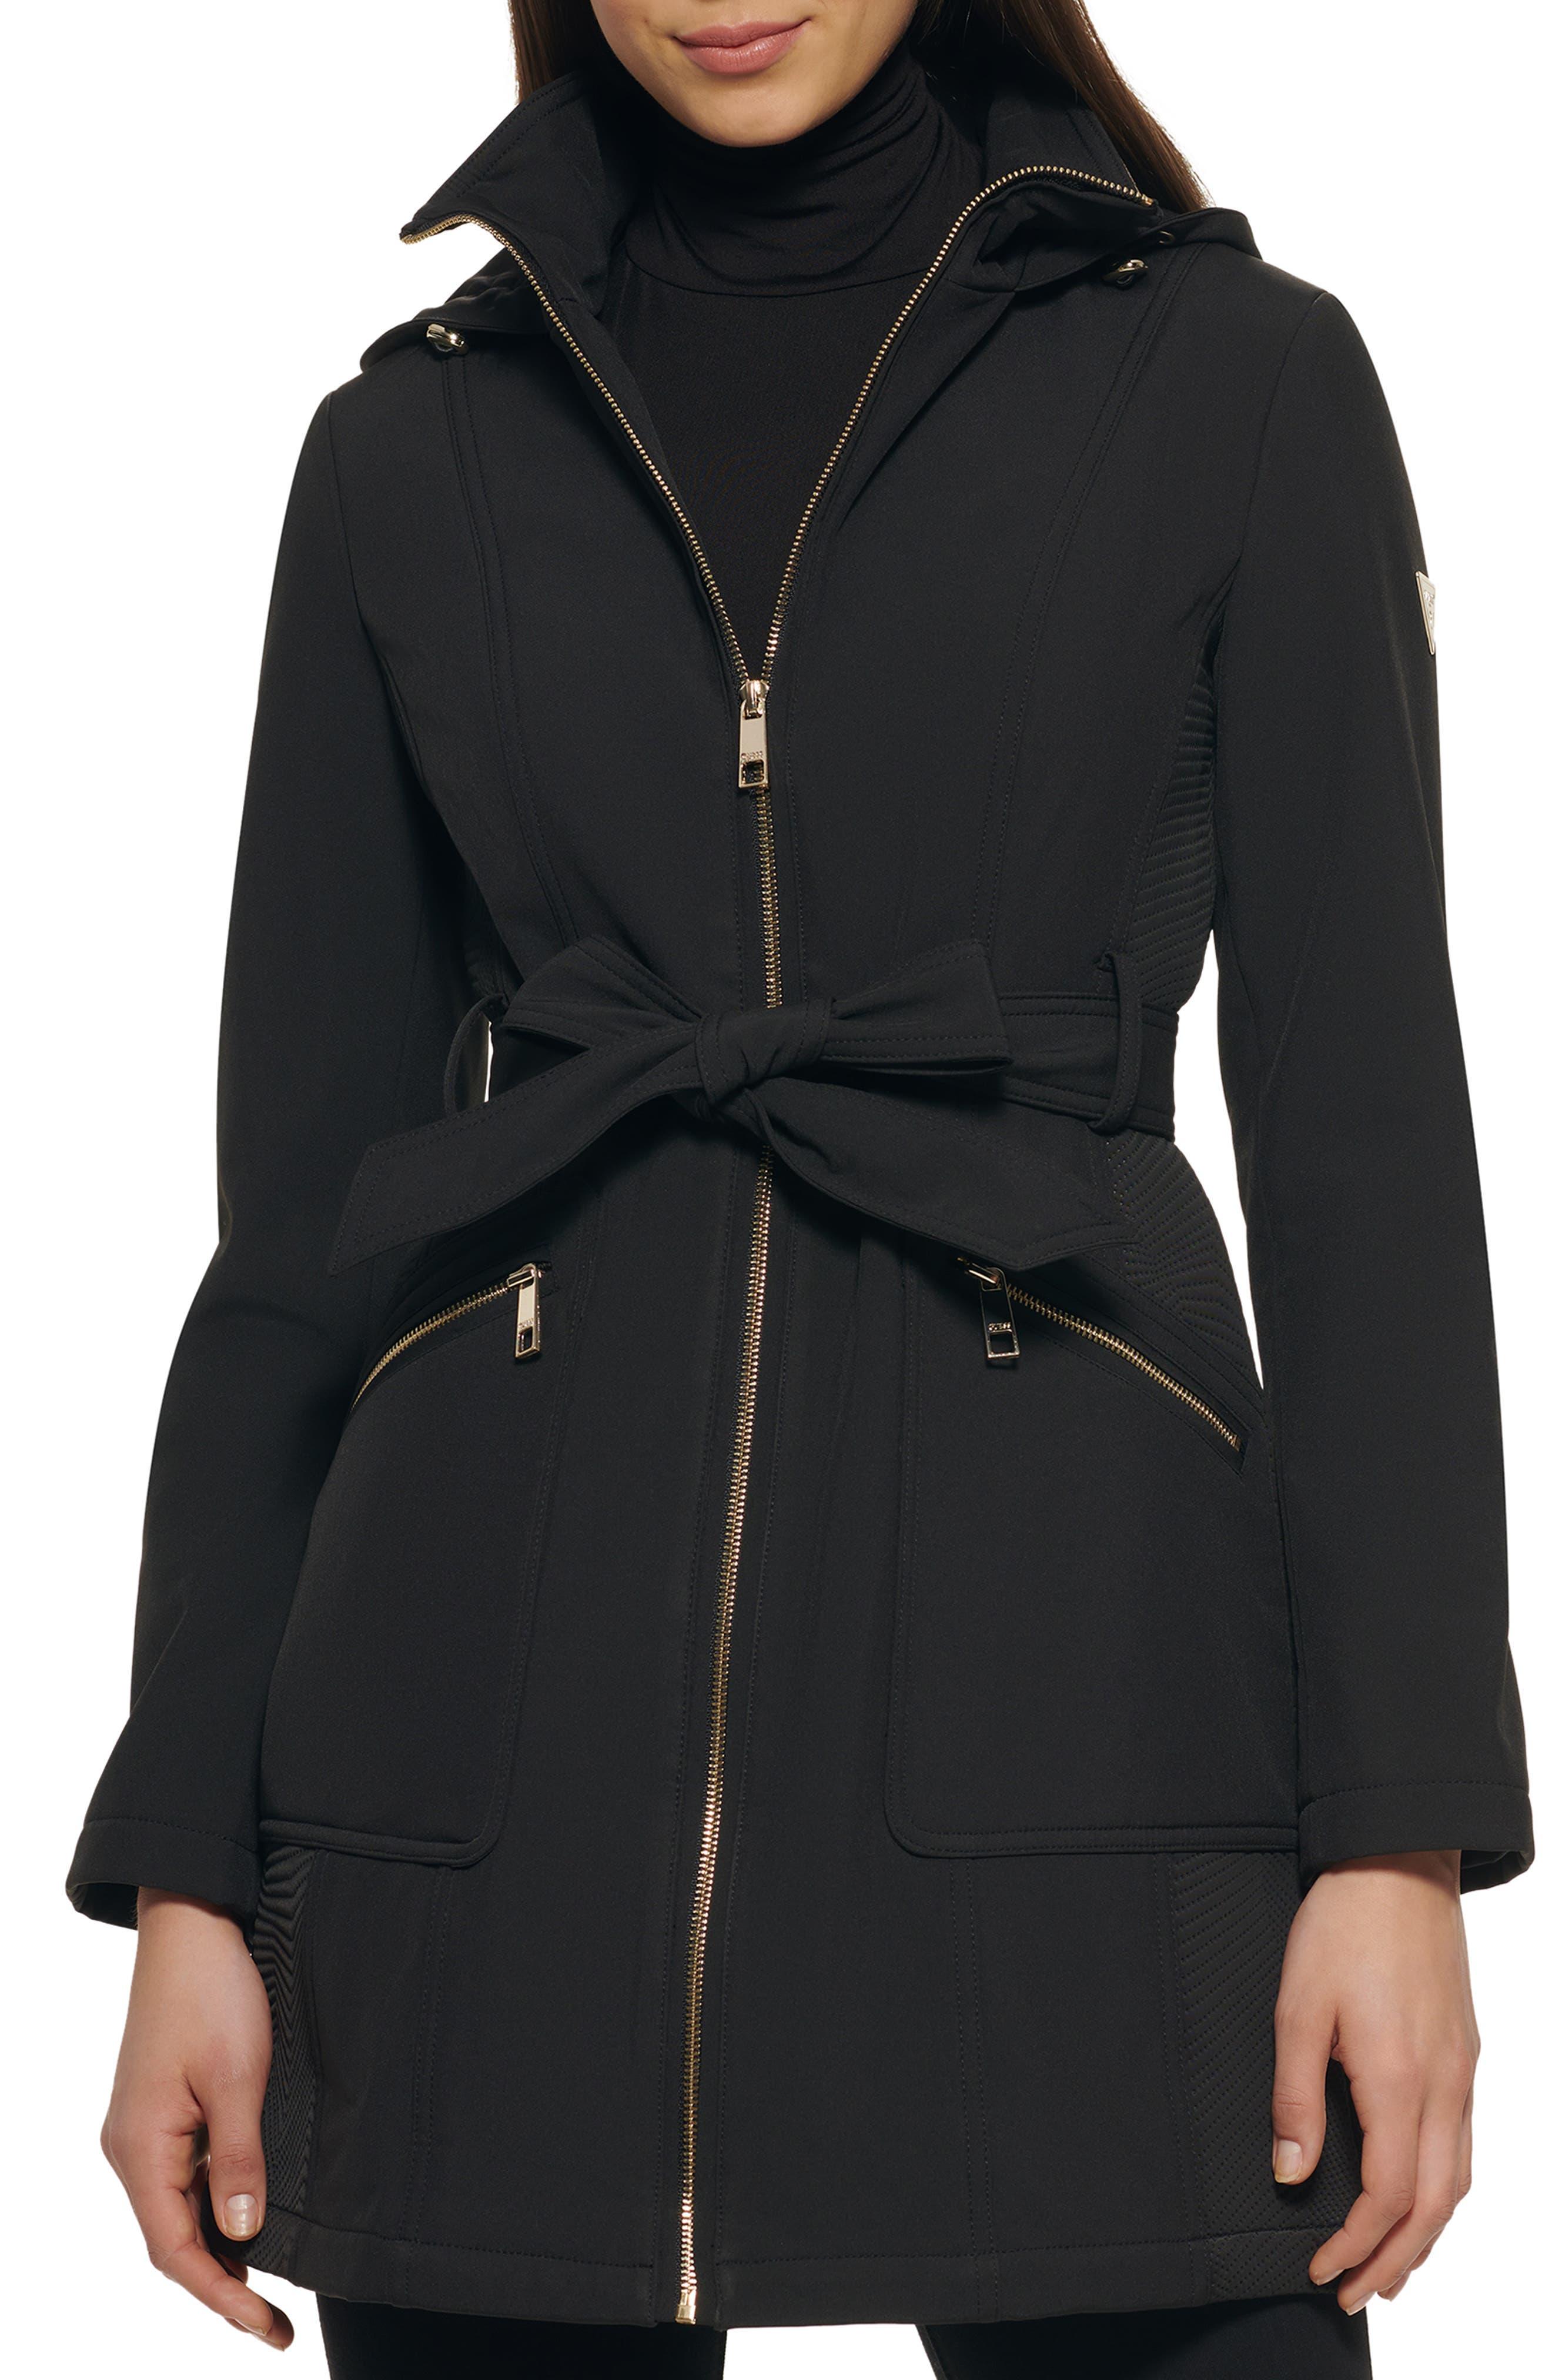 Guess Belted Zip Front Soft Shell Jacket In Black At Nordstrom Rack | Lyst